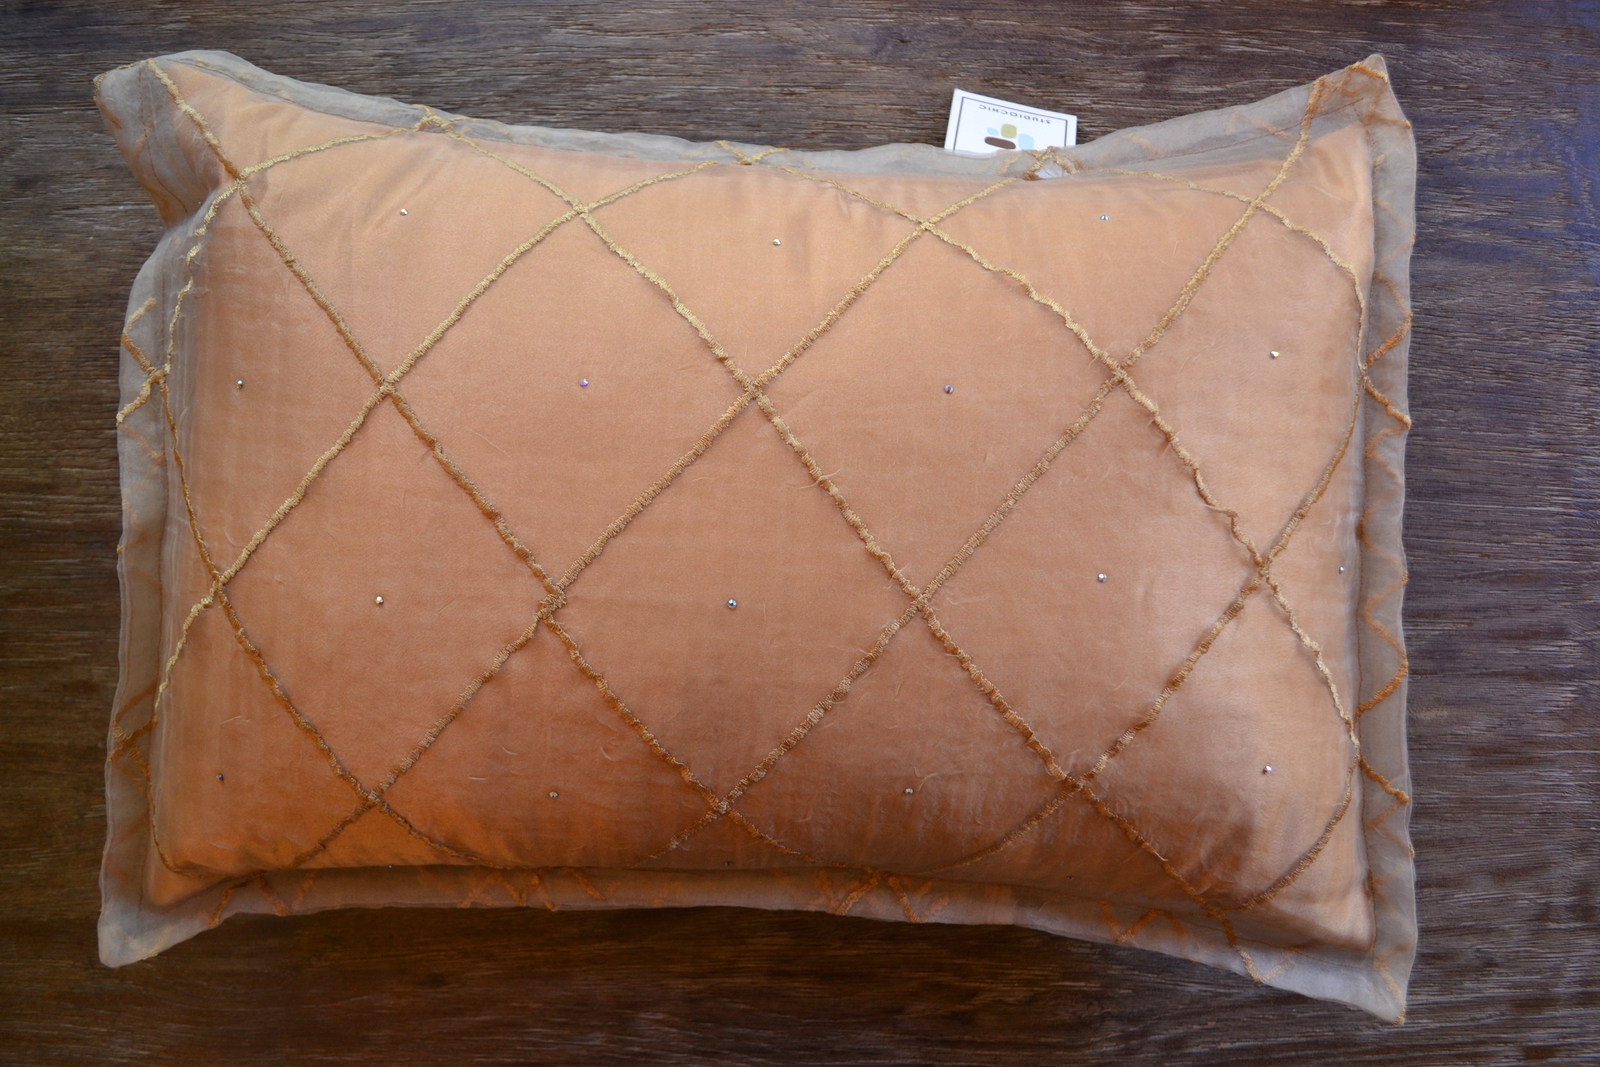 Studio Chic Embroidered Organza Pillow with Swarvoski crystals in Peach and Gold - $76.49